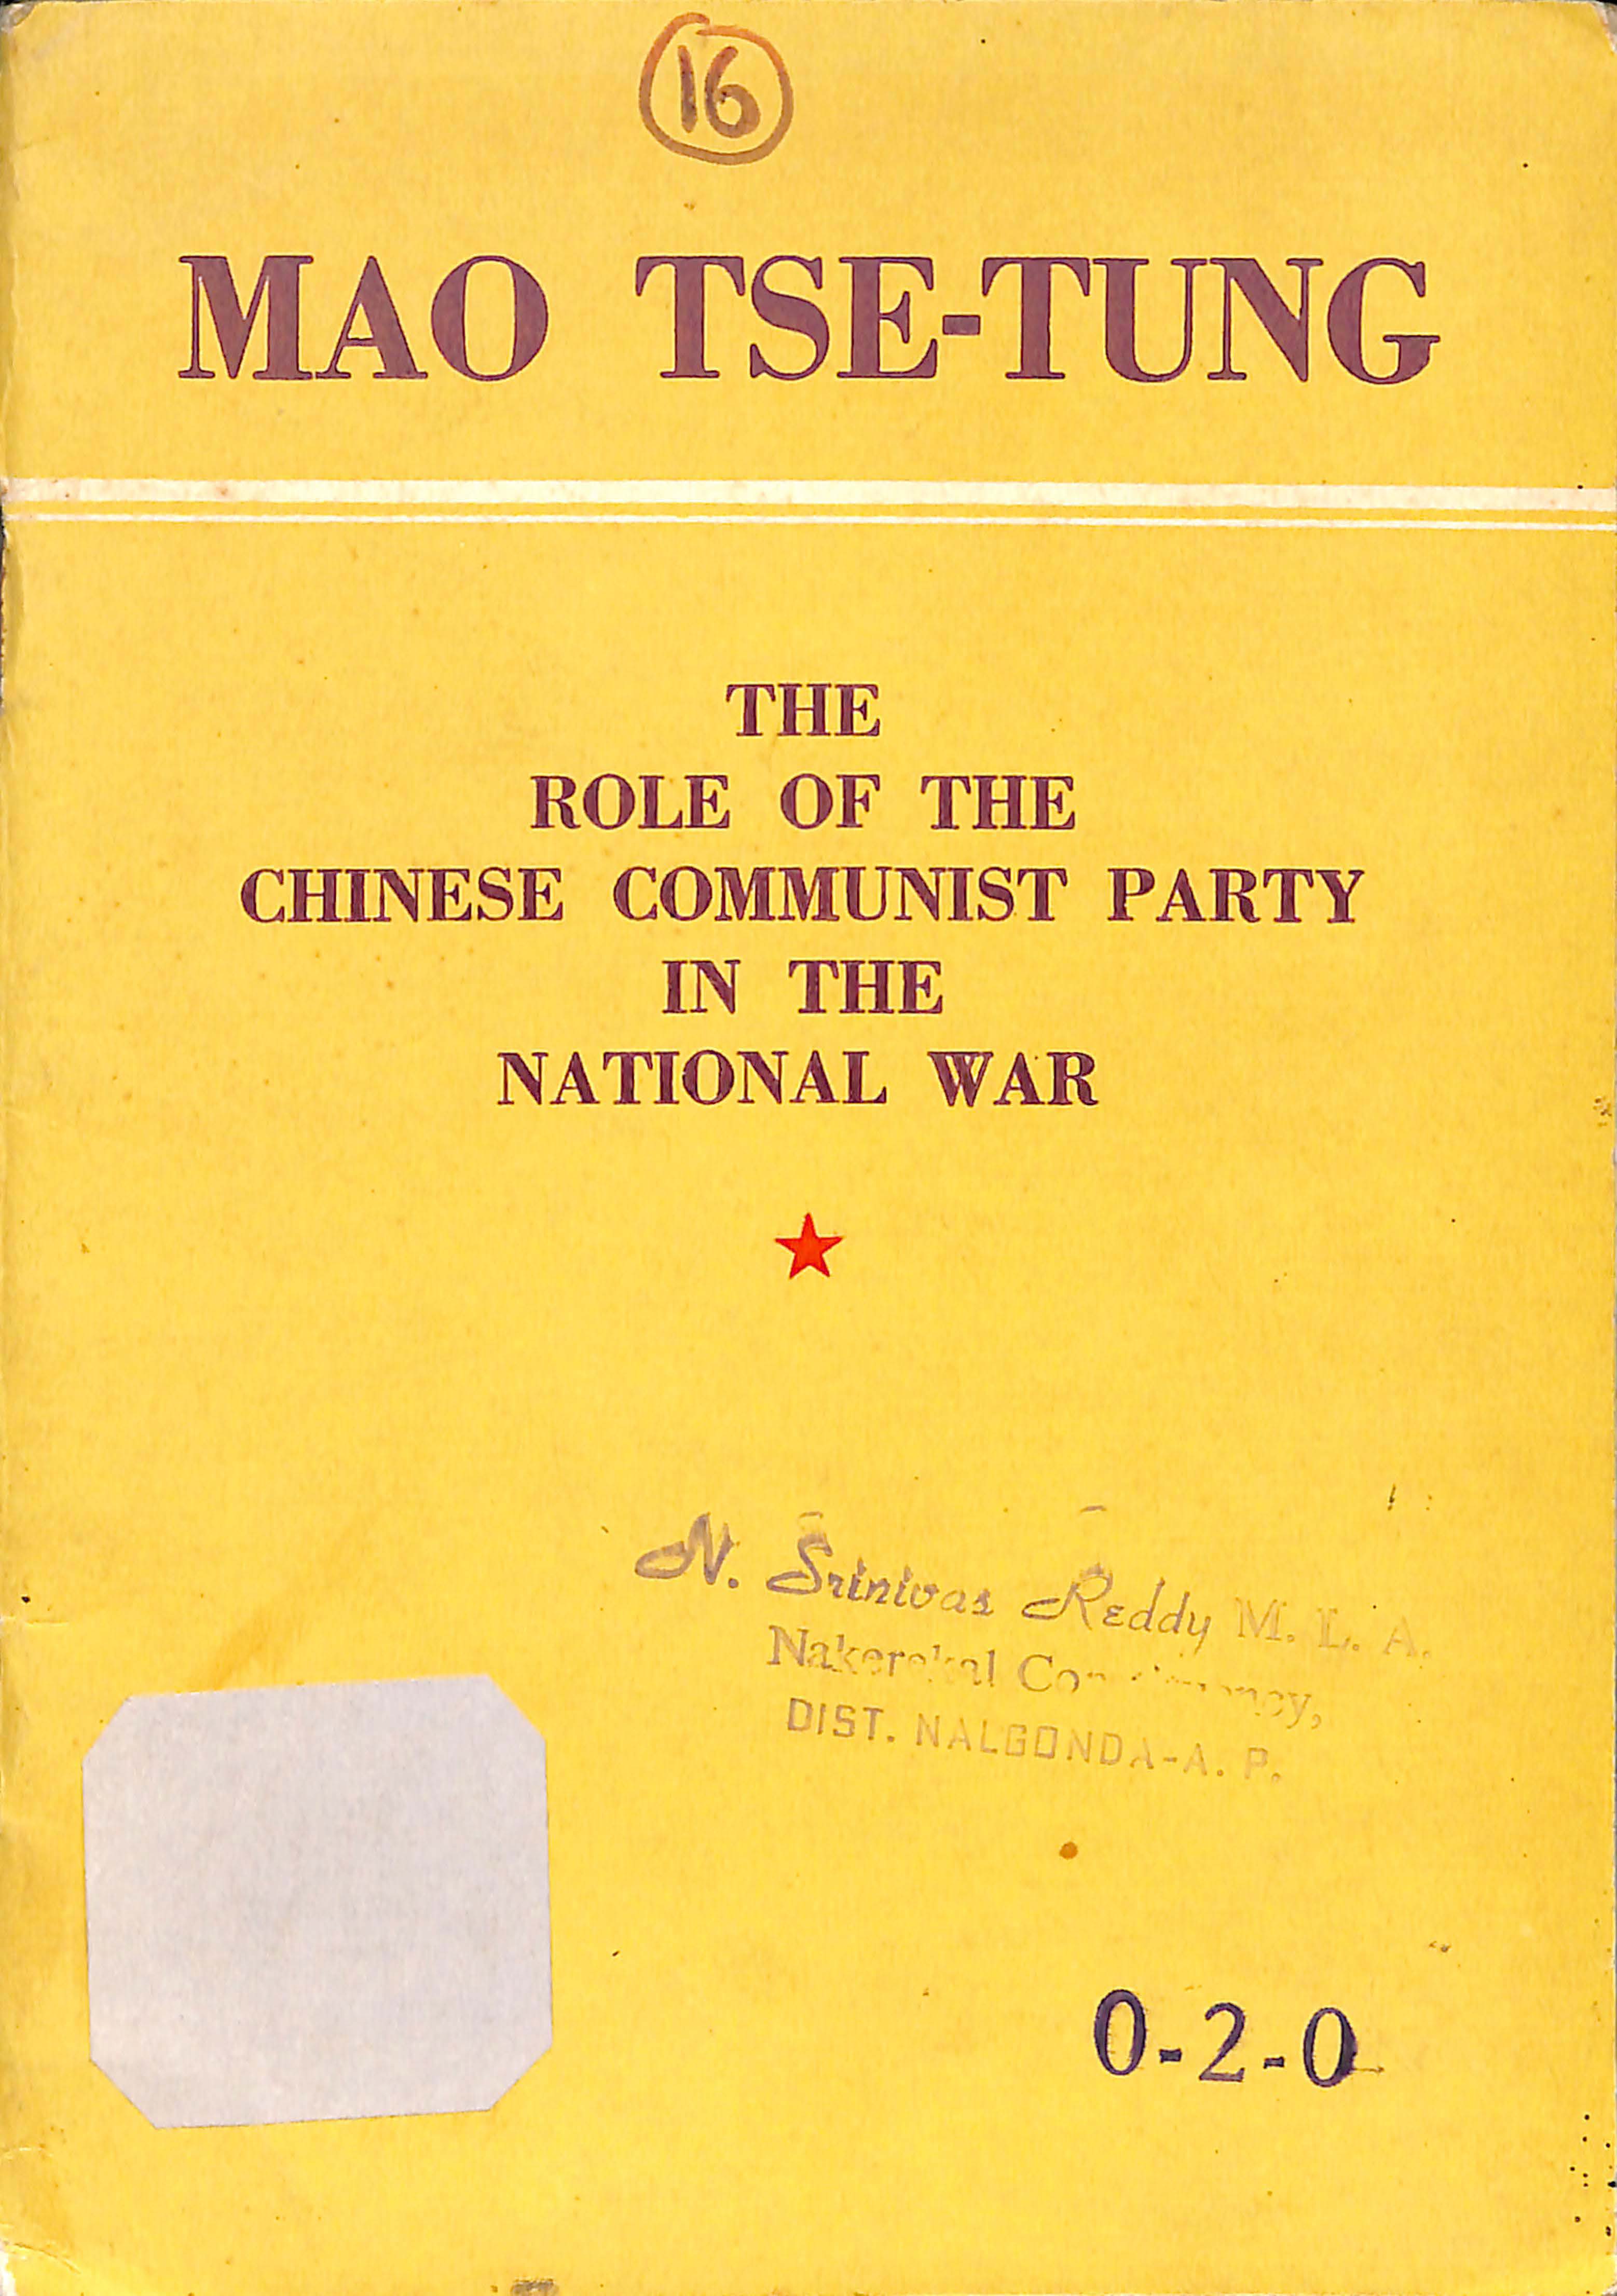 The role of the chinese communist party in the national war